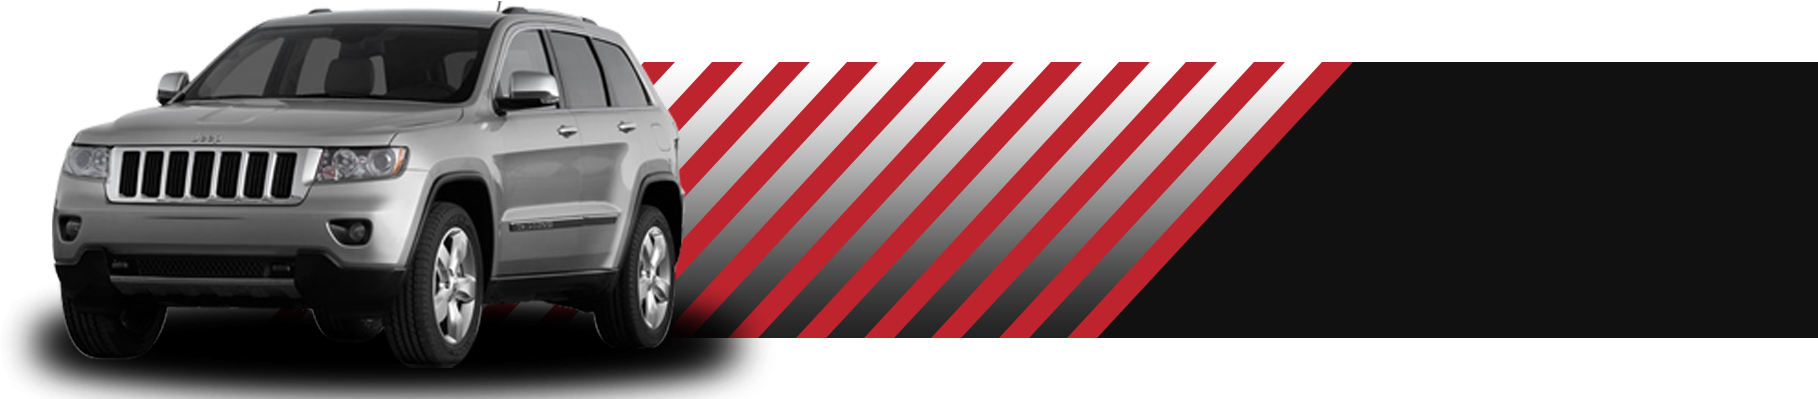 A Red And White Striped Sign